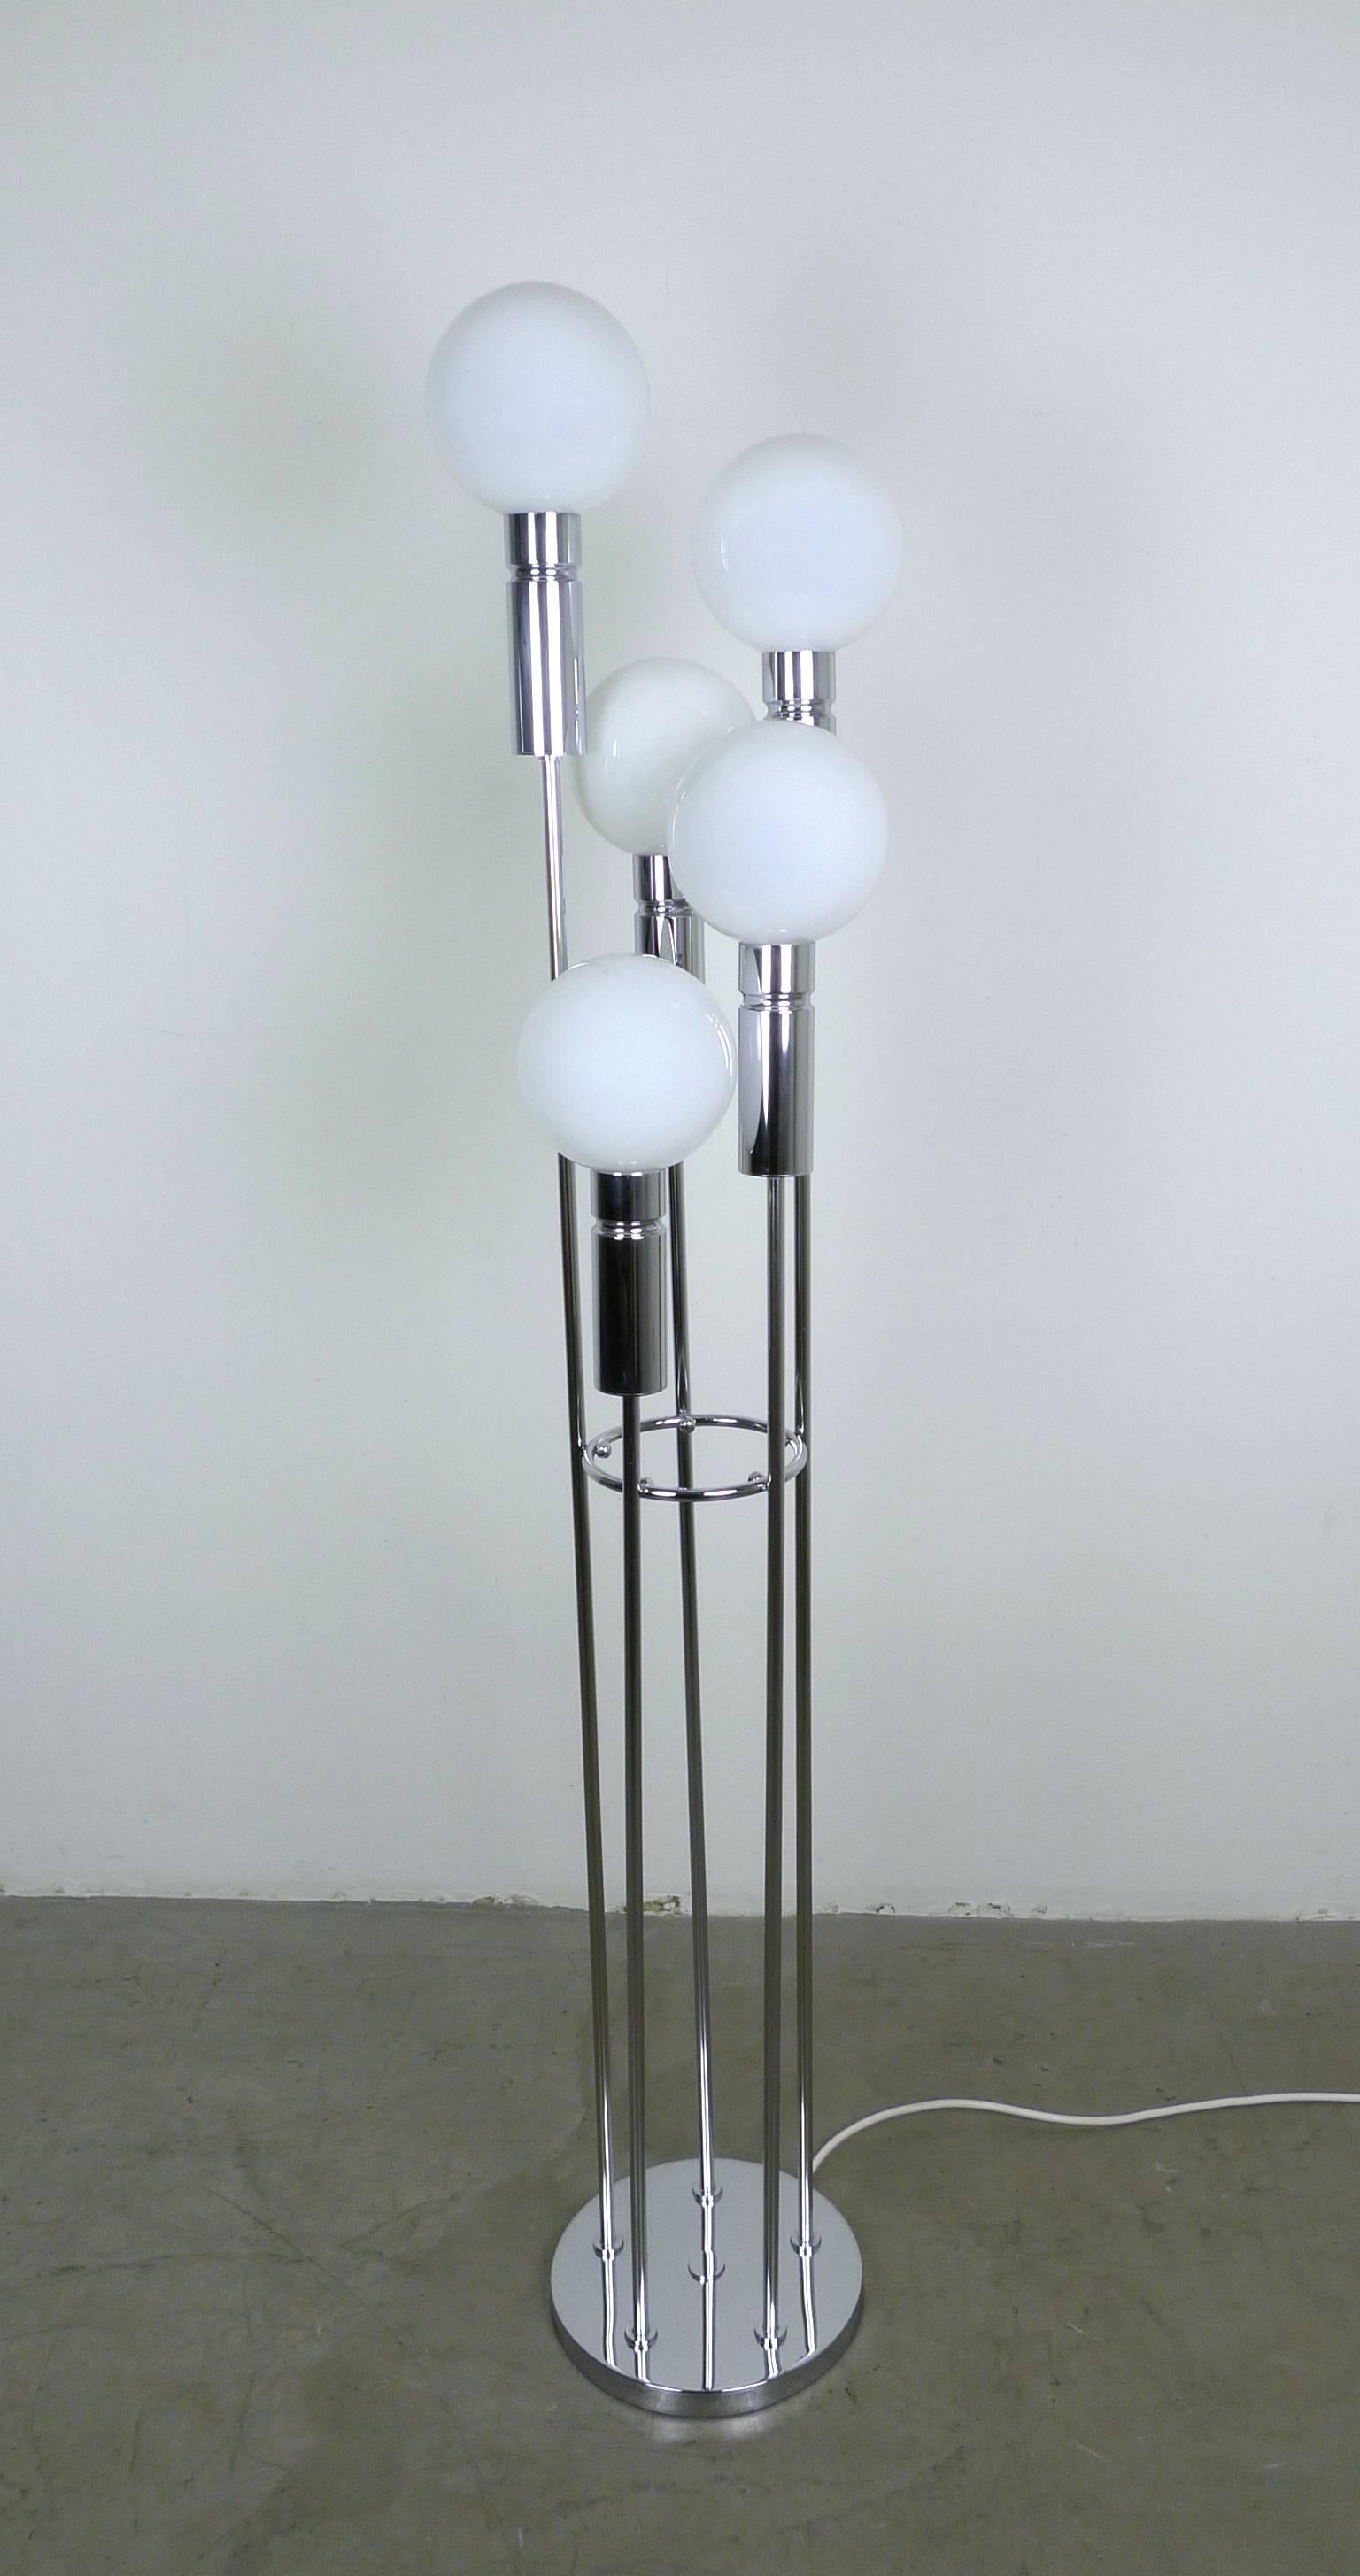 Space Age Chromed Floor Lamp with Five Glass Balls from Sölken, Germany, 1970s